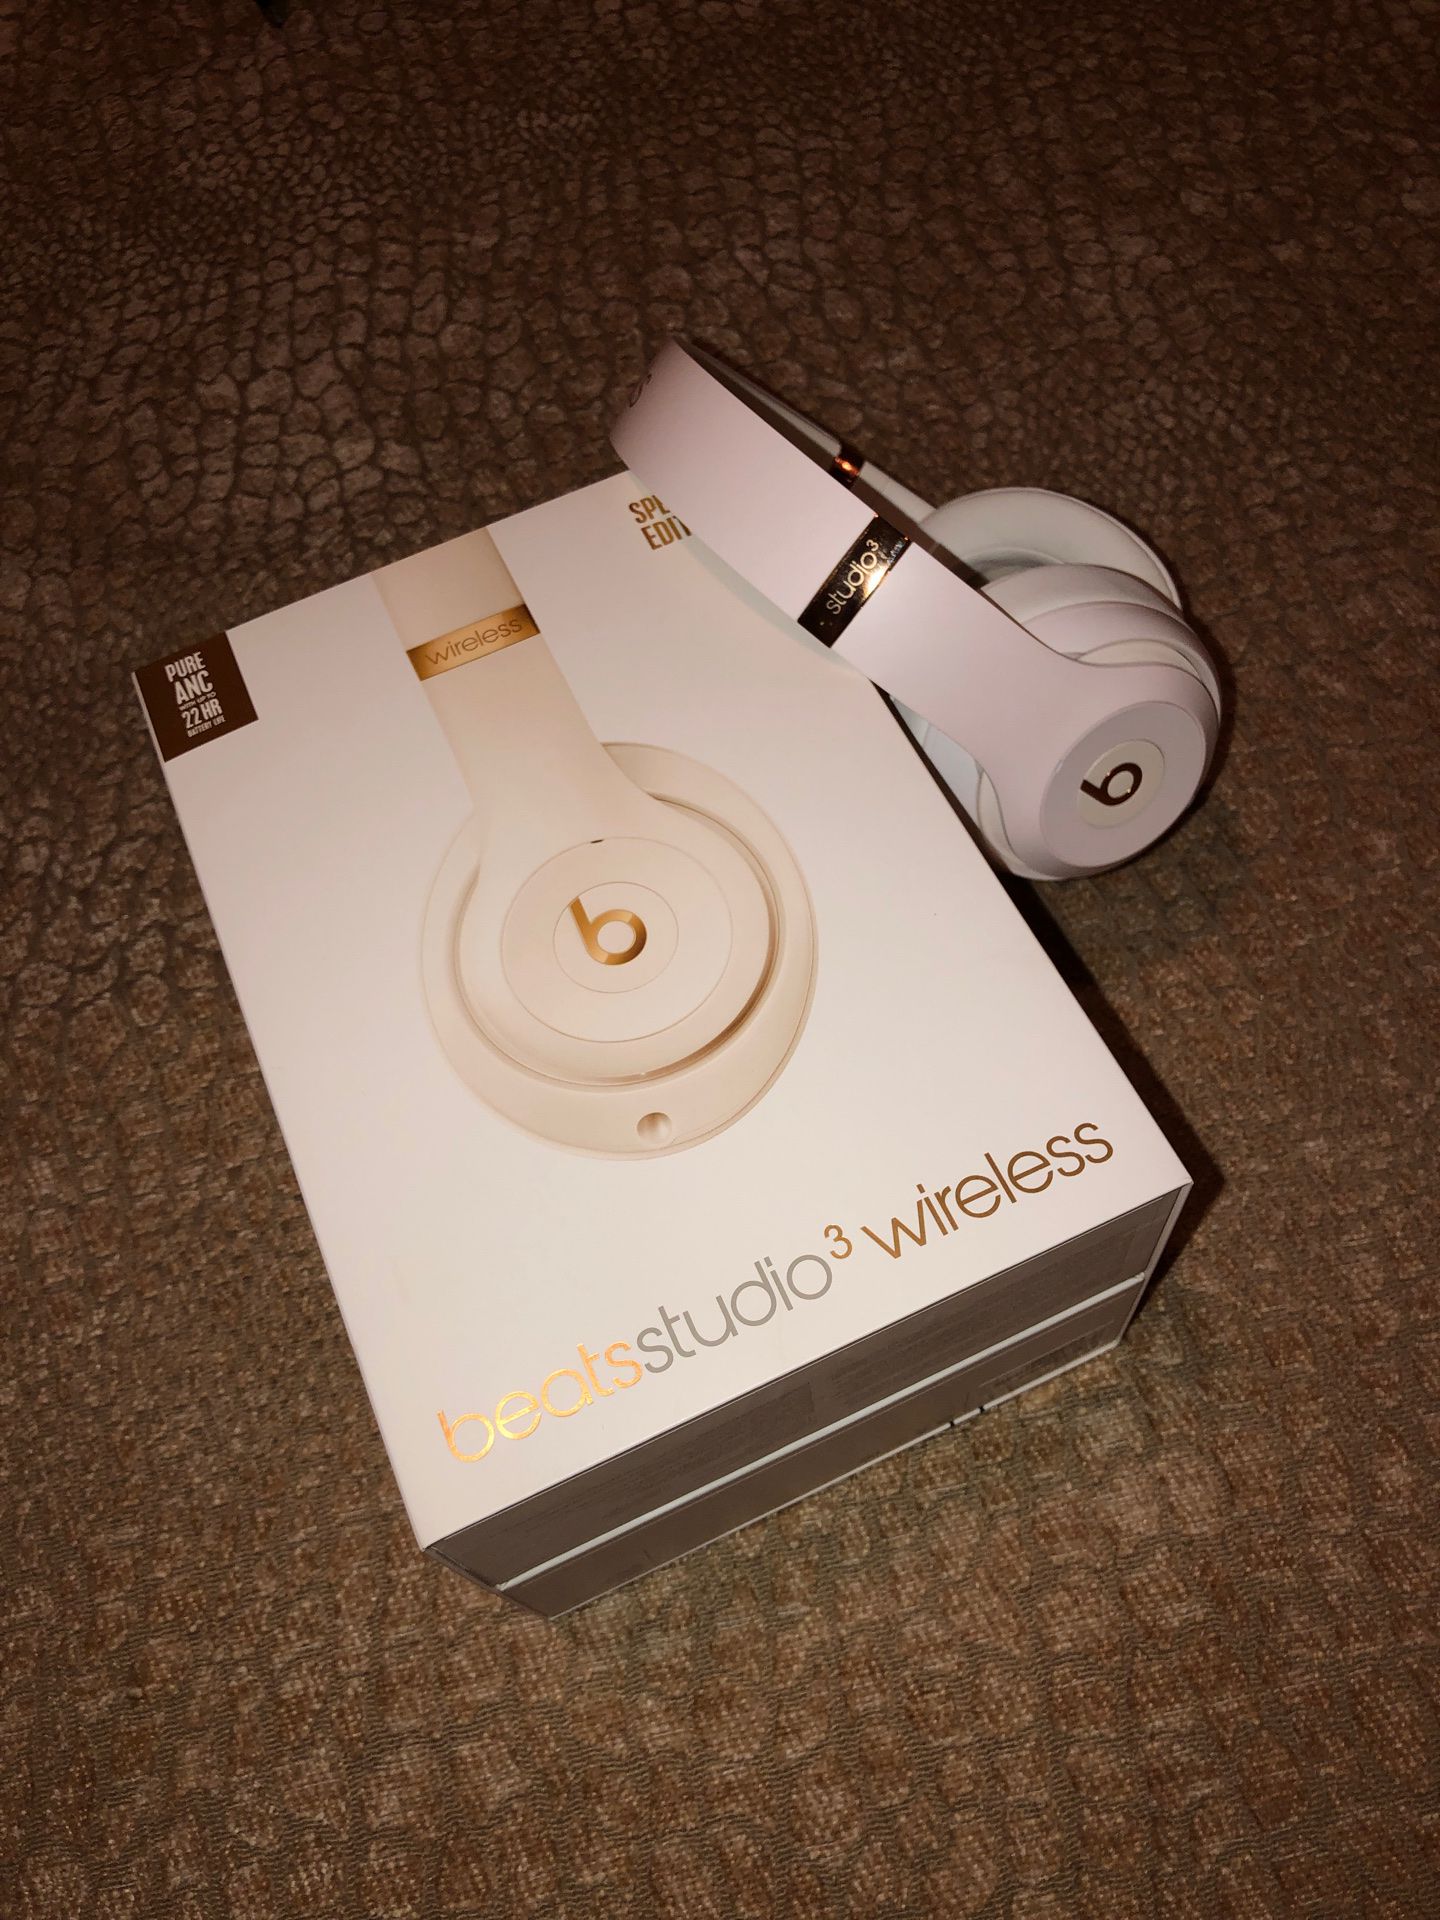 (best offer) NEW Opened - Limited Edition- Beats Studio 3 Wireless Headphones